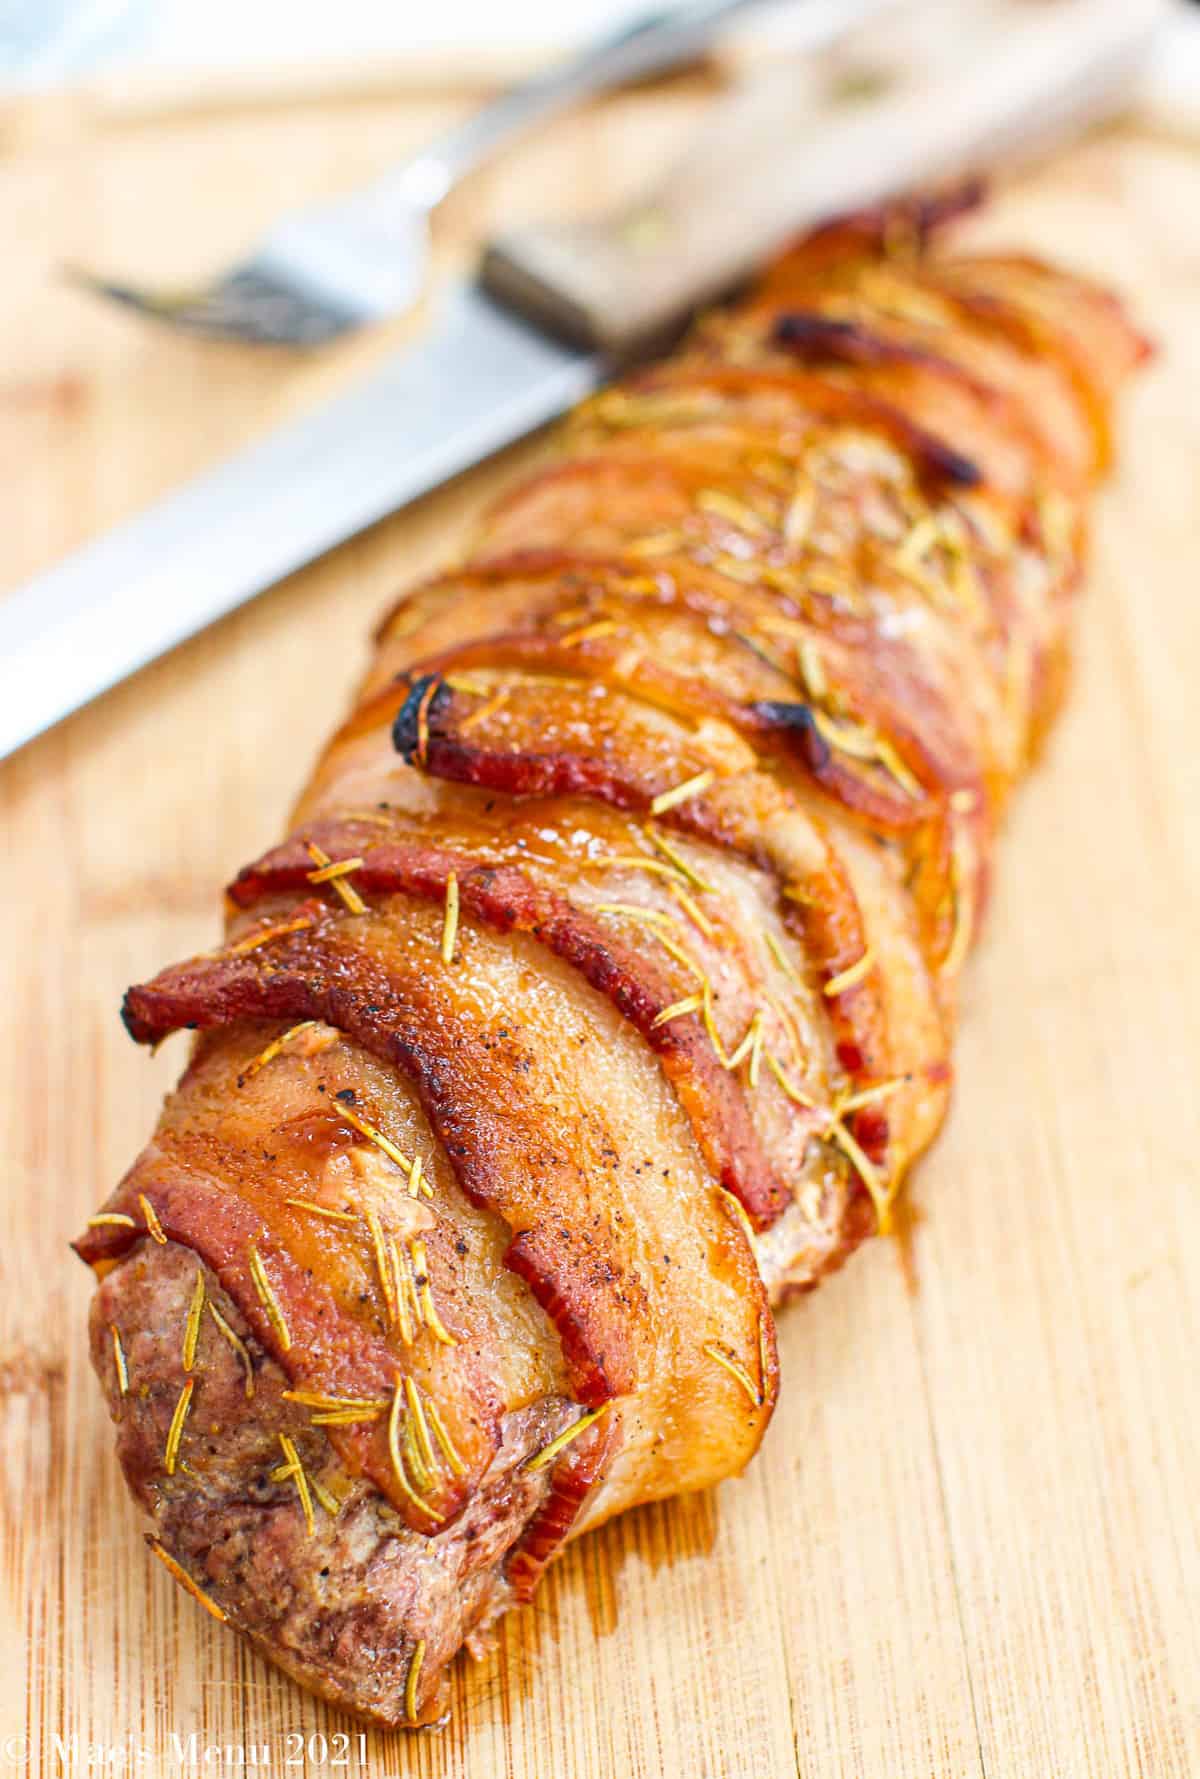 A side shot of maple bacon-wrapped bacon on a wooden cutting board